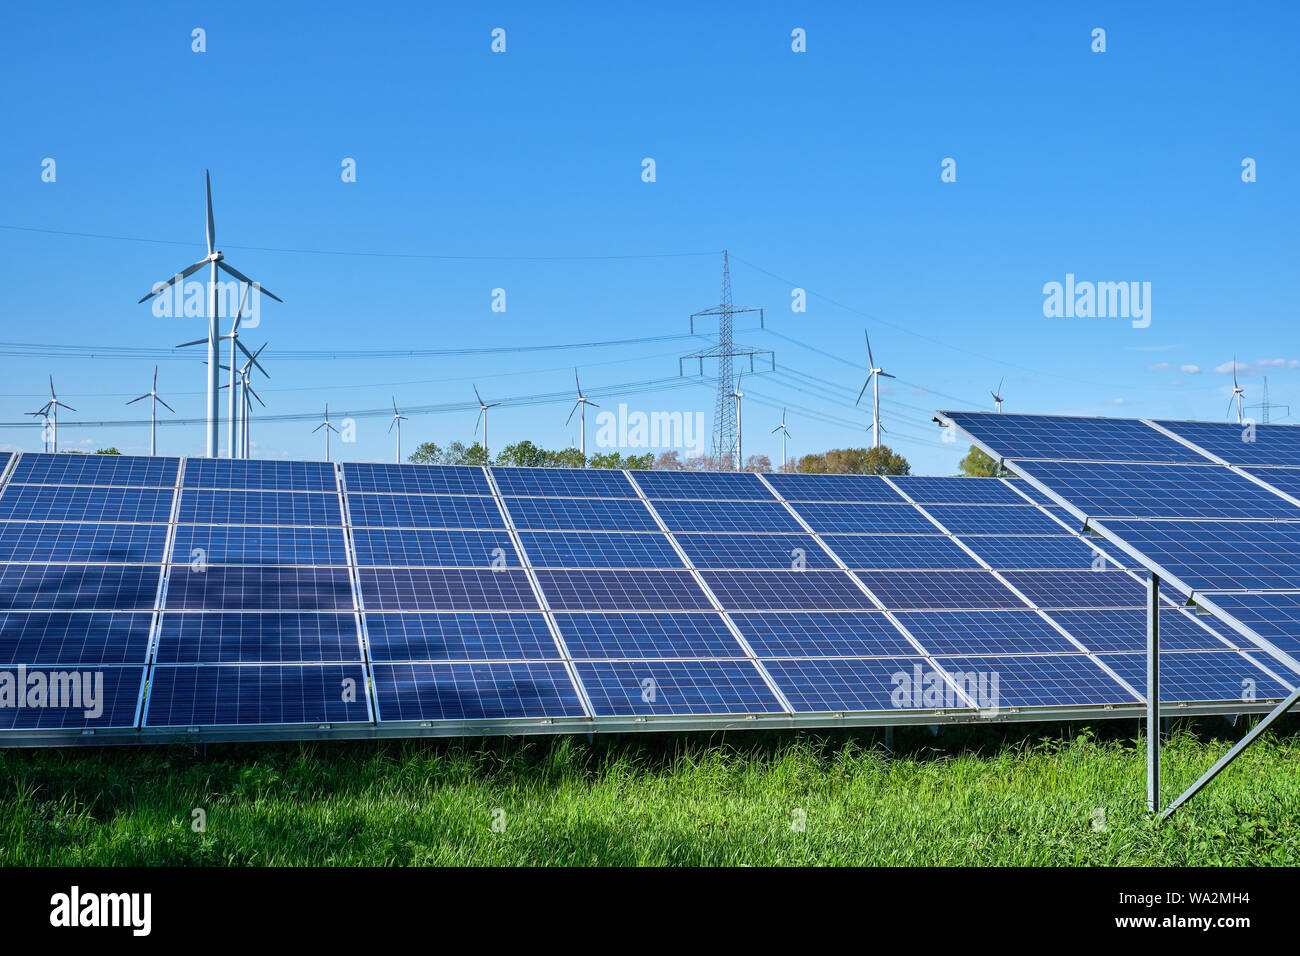 Solar panels, wind turbines and electricity pylons seen in Germany Stock Photo